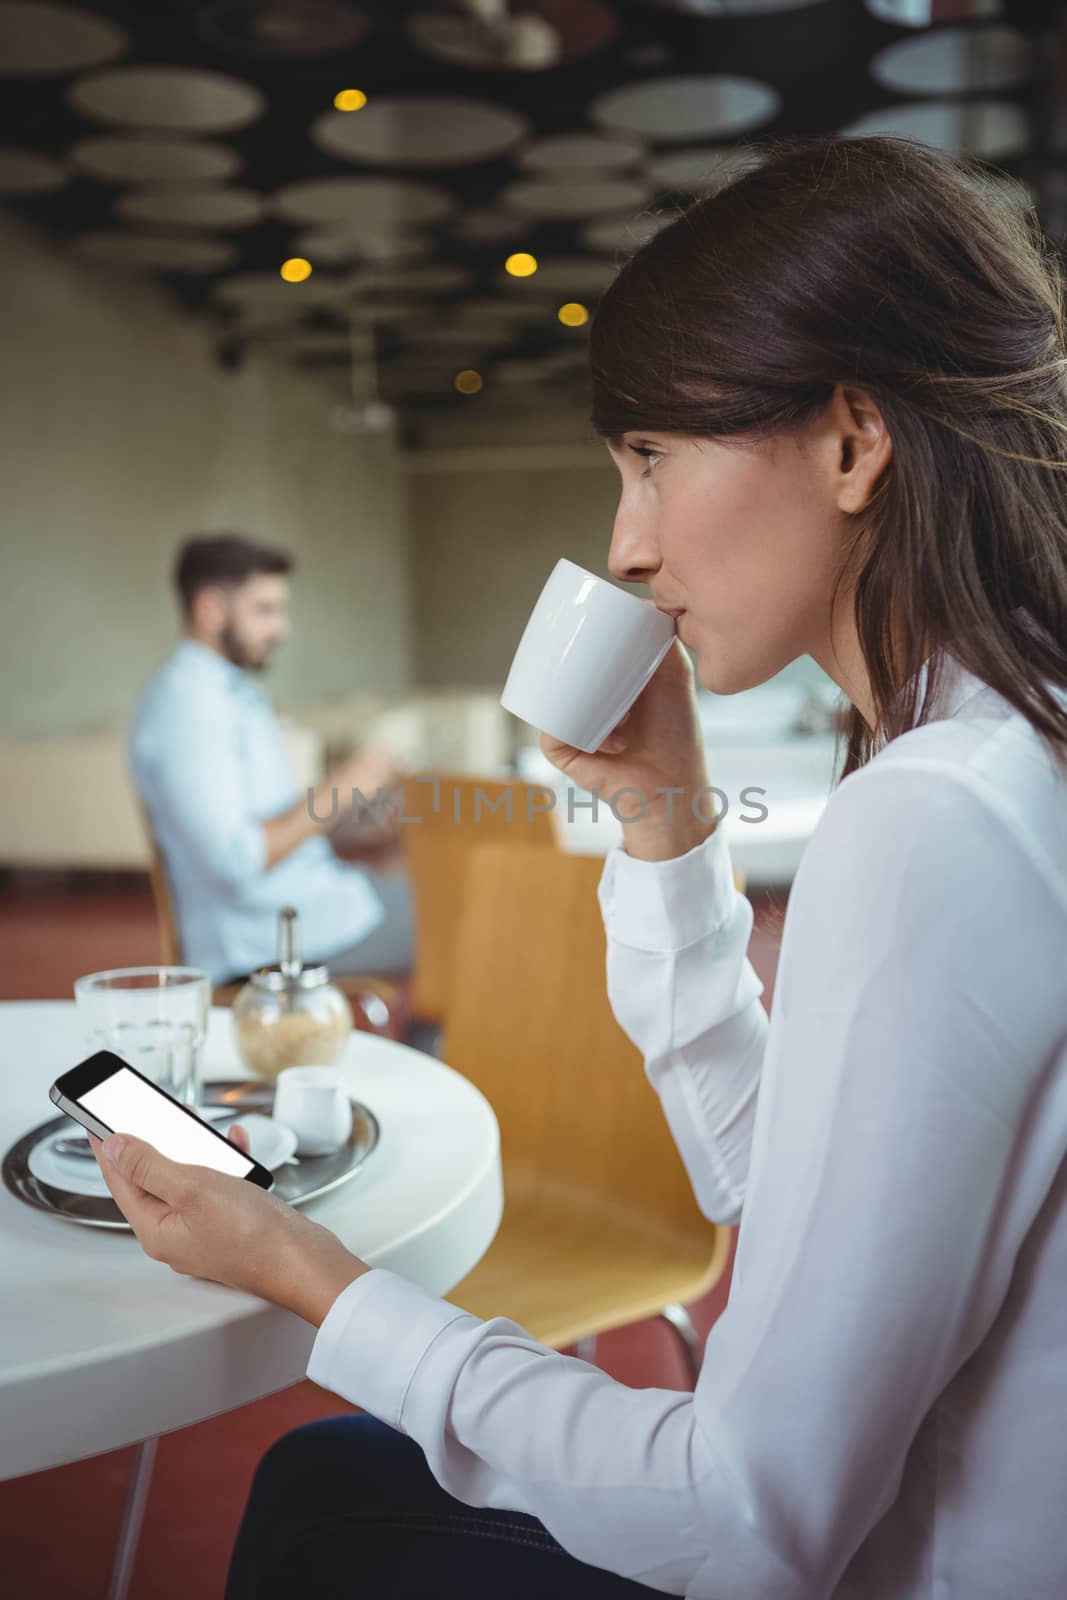 Thoughtful executive using mobile phone while having coffee in cafÃ©